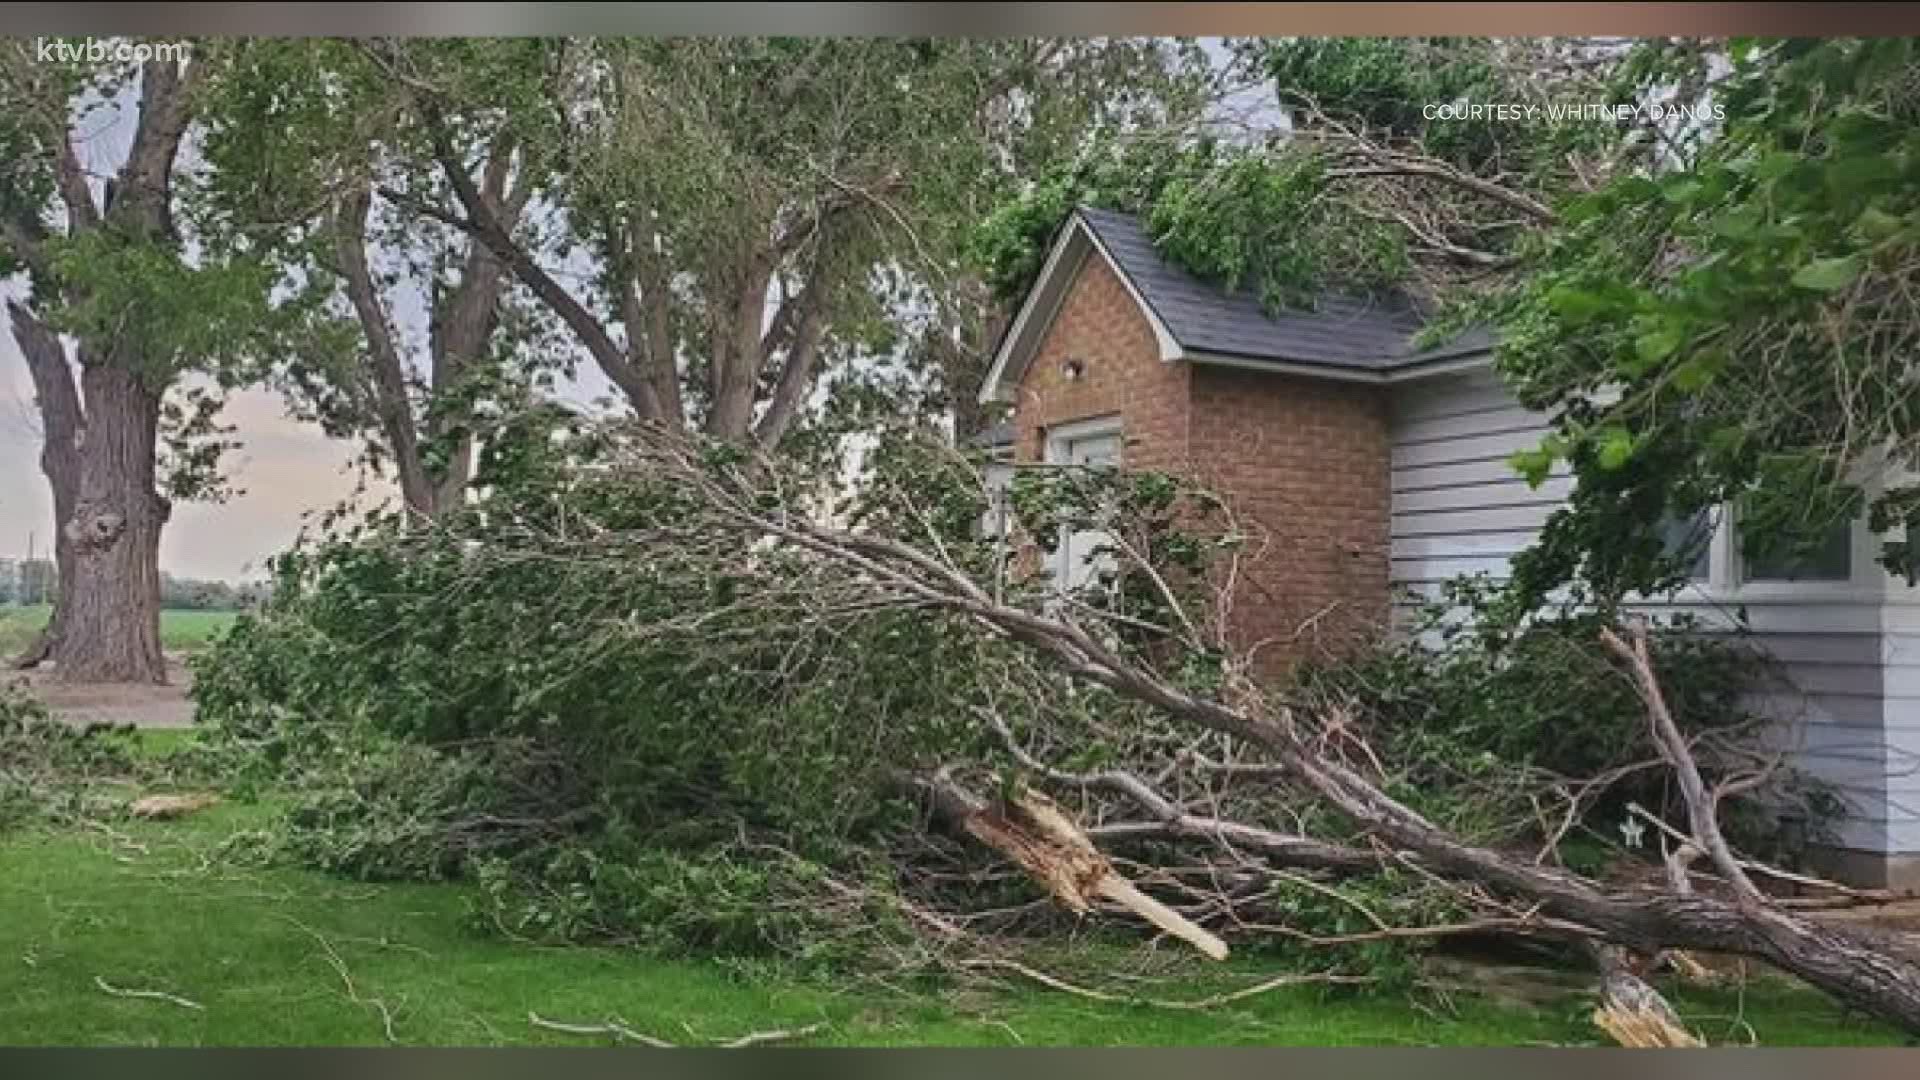 A wind and thunderstorm that blew into the area Tuesday evening left damage in its wake in the form of downed limbs and toppled trees.